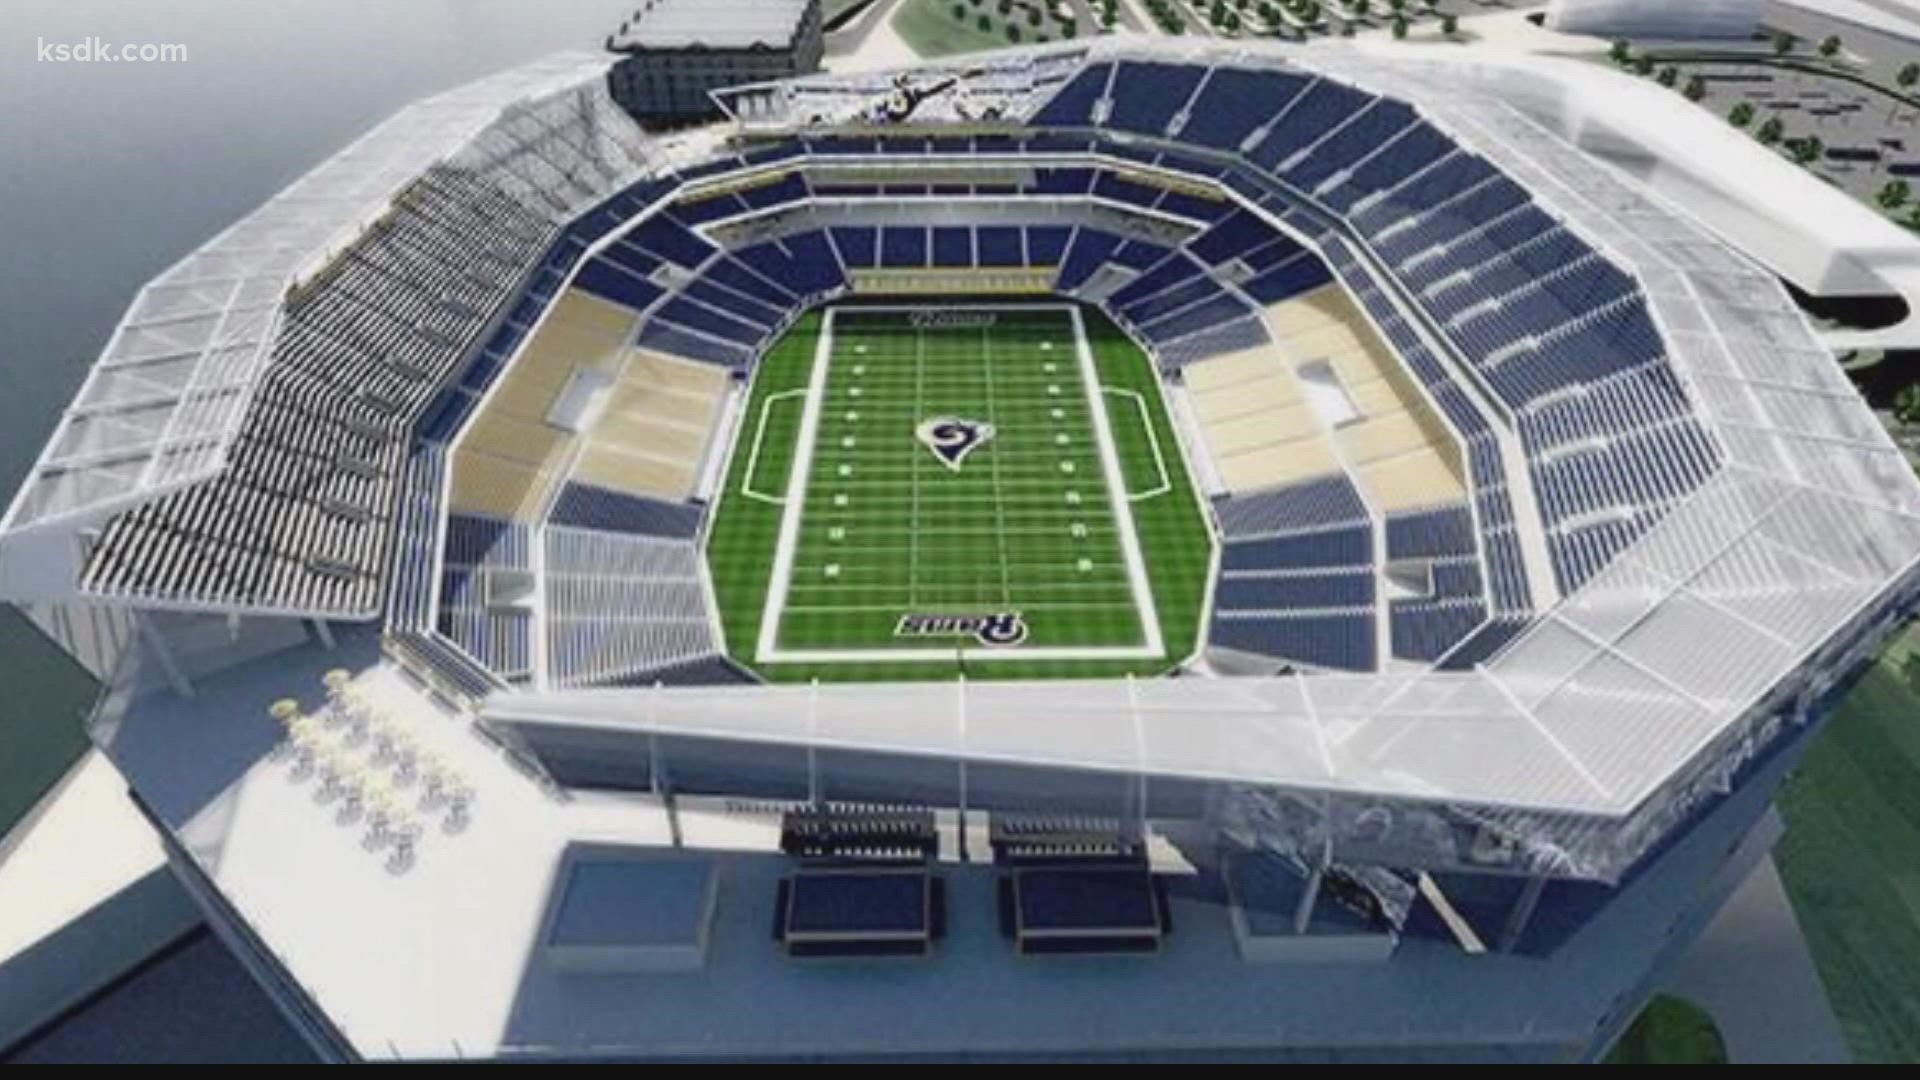 The lawsuit was filed in 2017 after the Rams moved to Los Angeles. An expansion team was not considered as compensation for St. Louis, sources said.